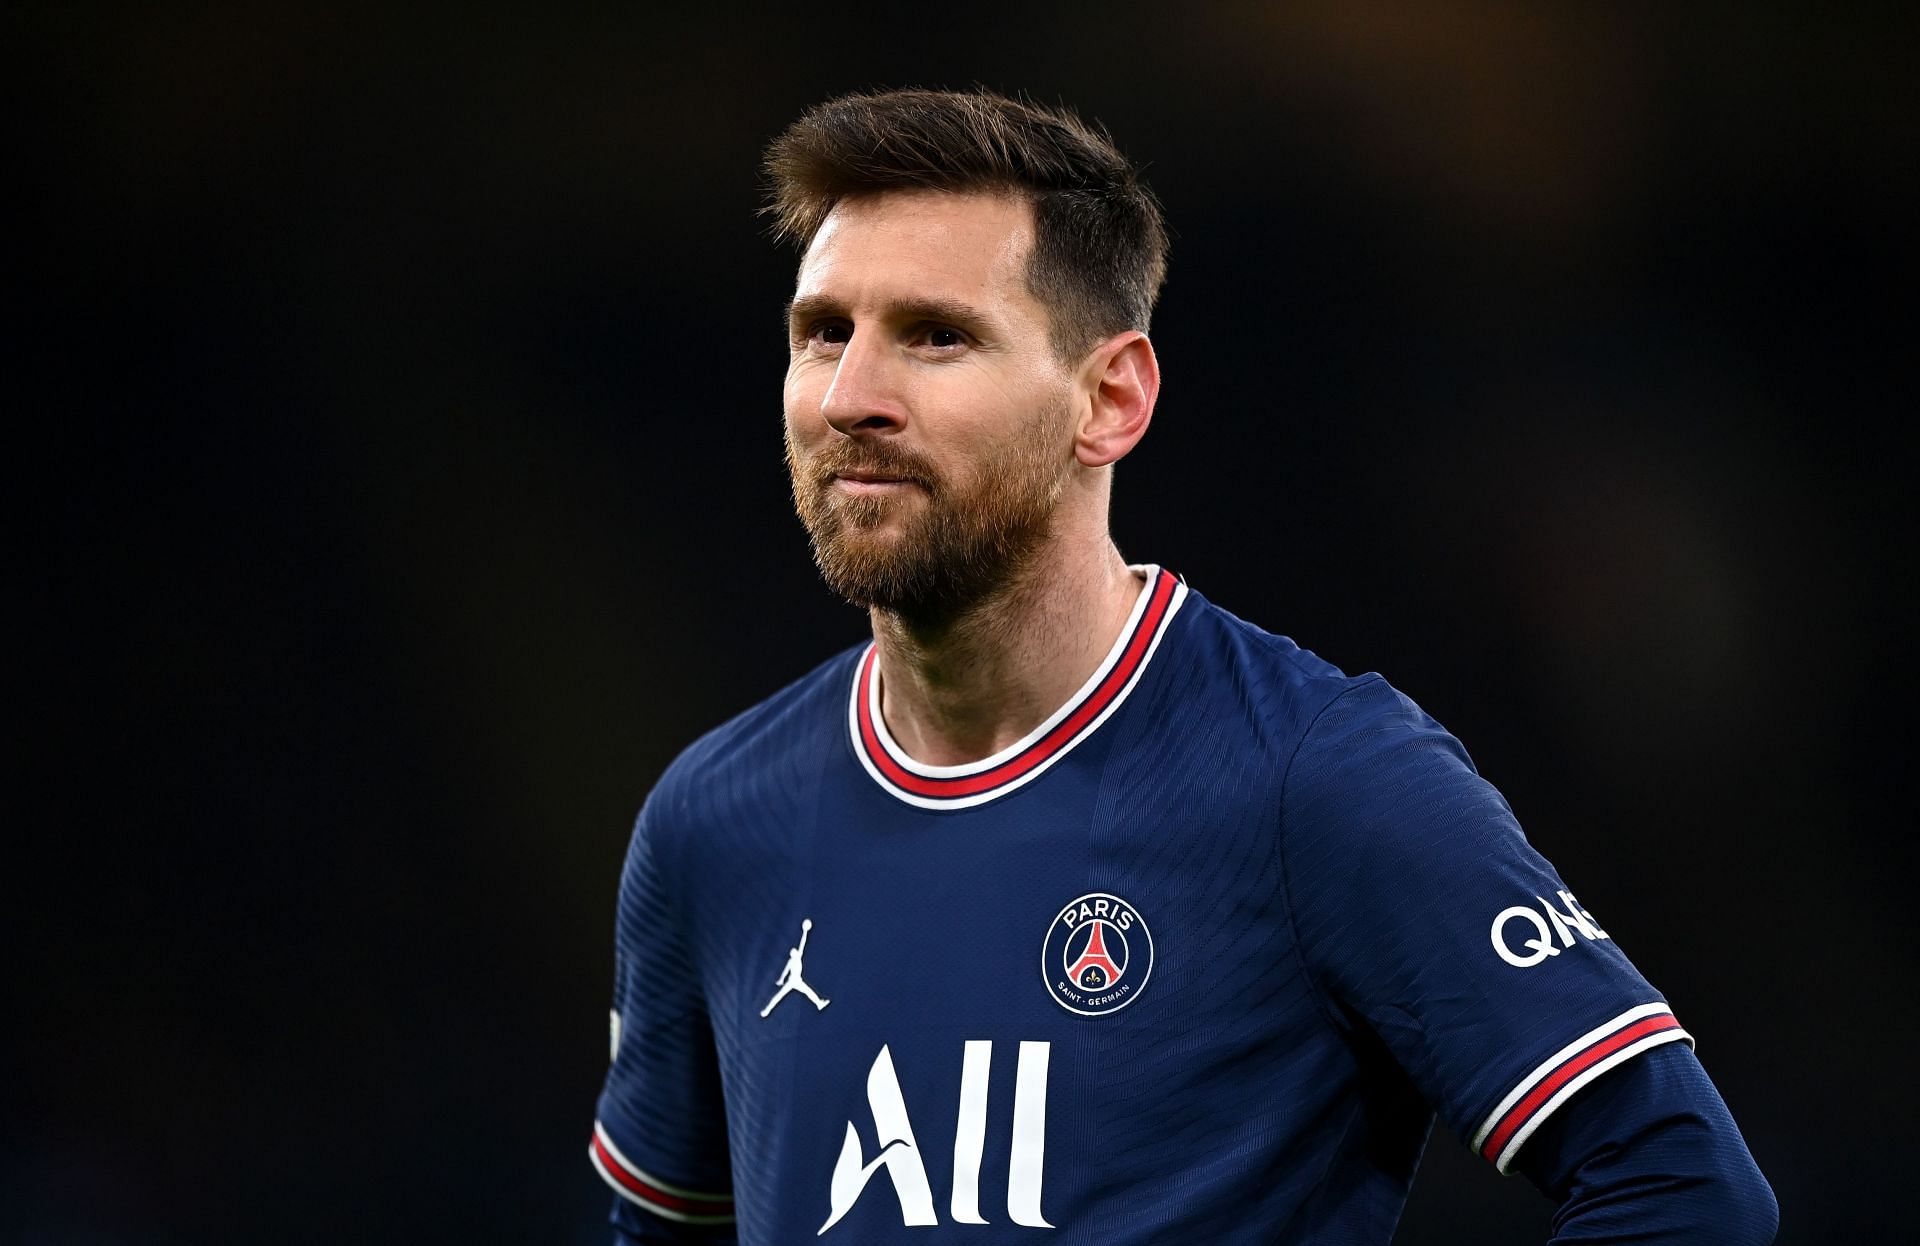 Messi is beginning to find form in France. (Photo by Shaun Botterill/Getty Images)